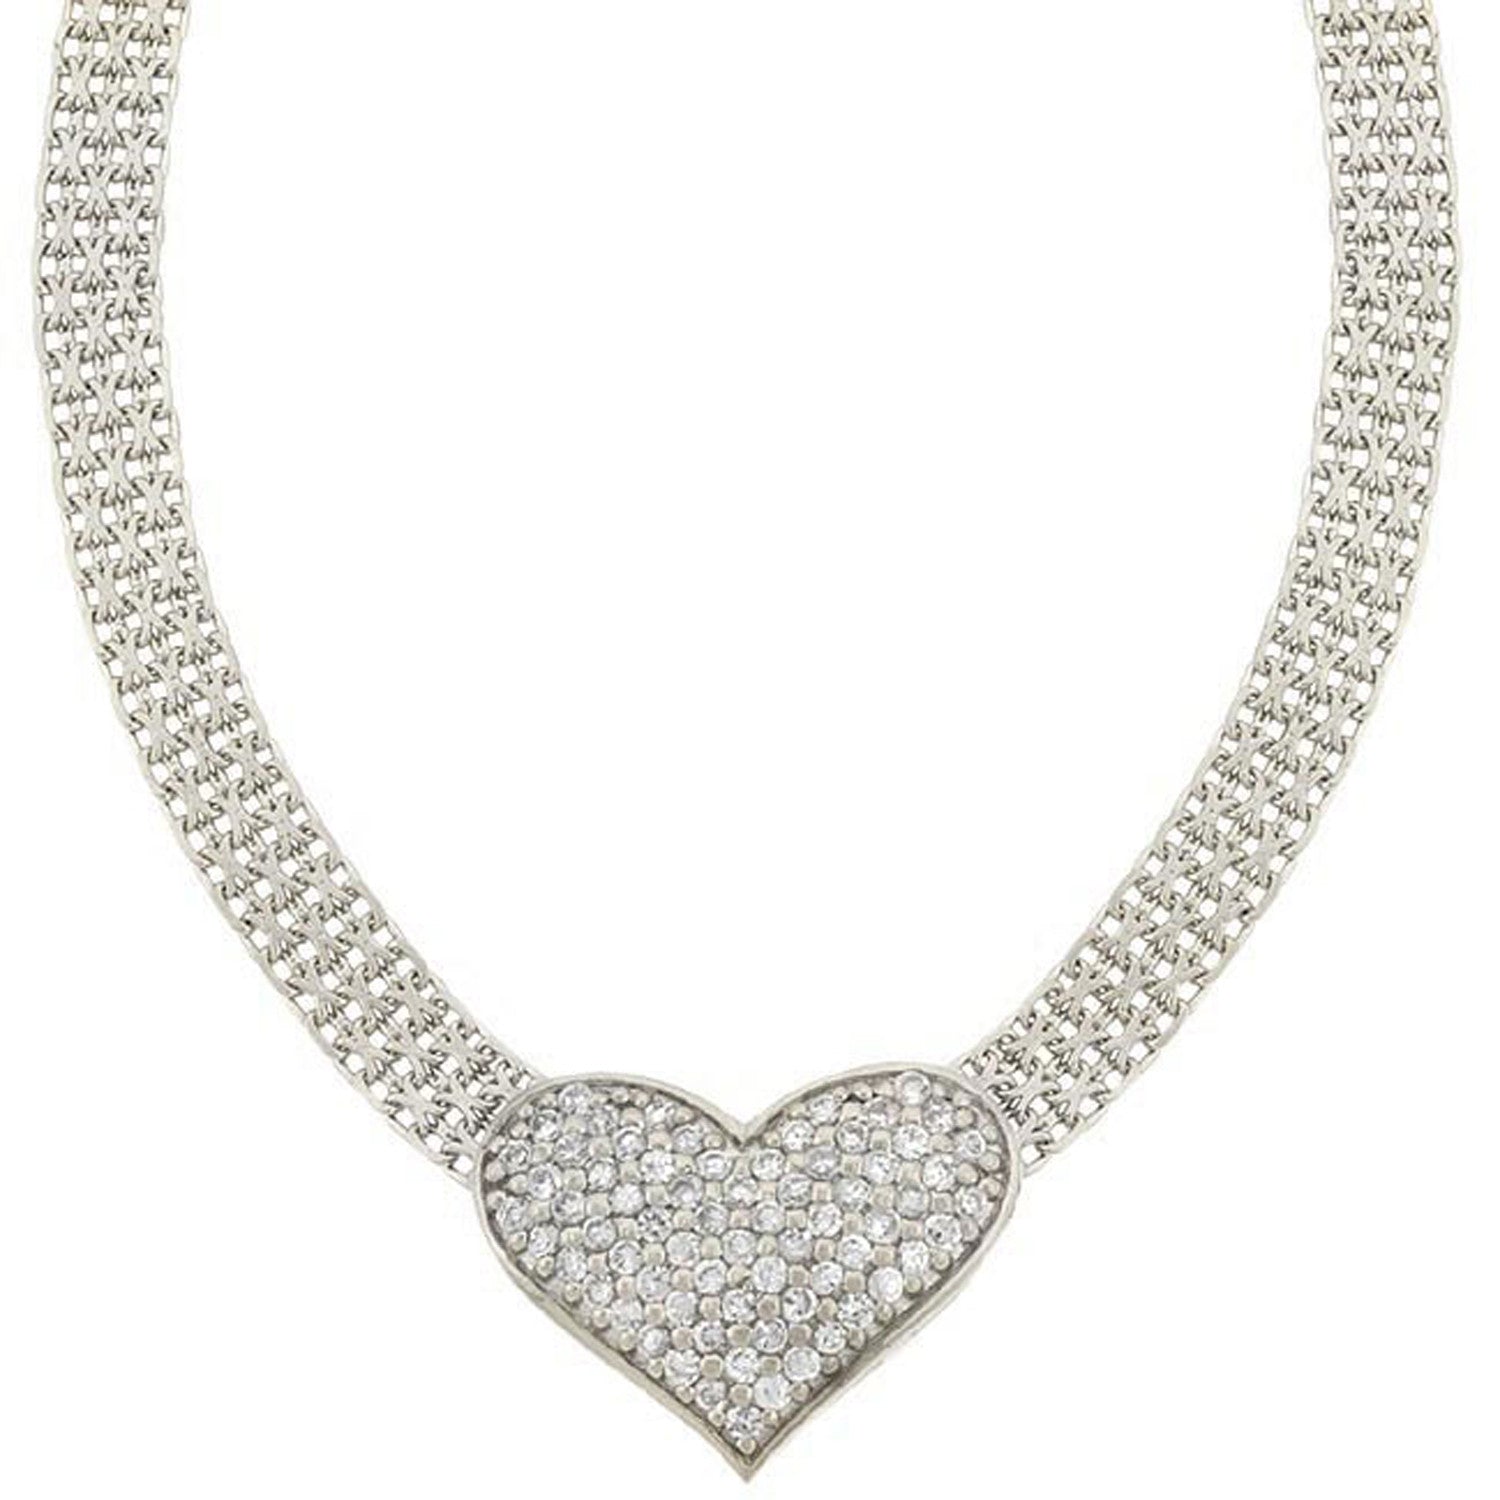 Heart Mesh Sterling Silver Necklace With Cubic Zirconia Accents